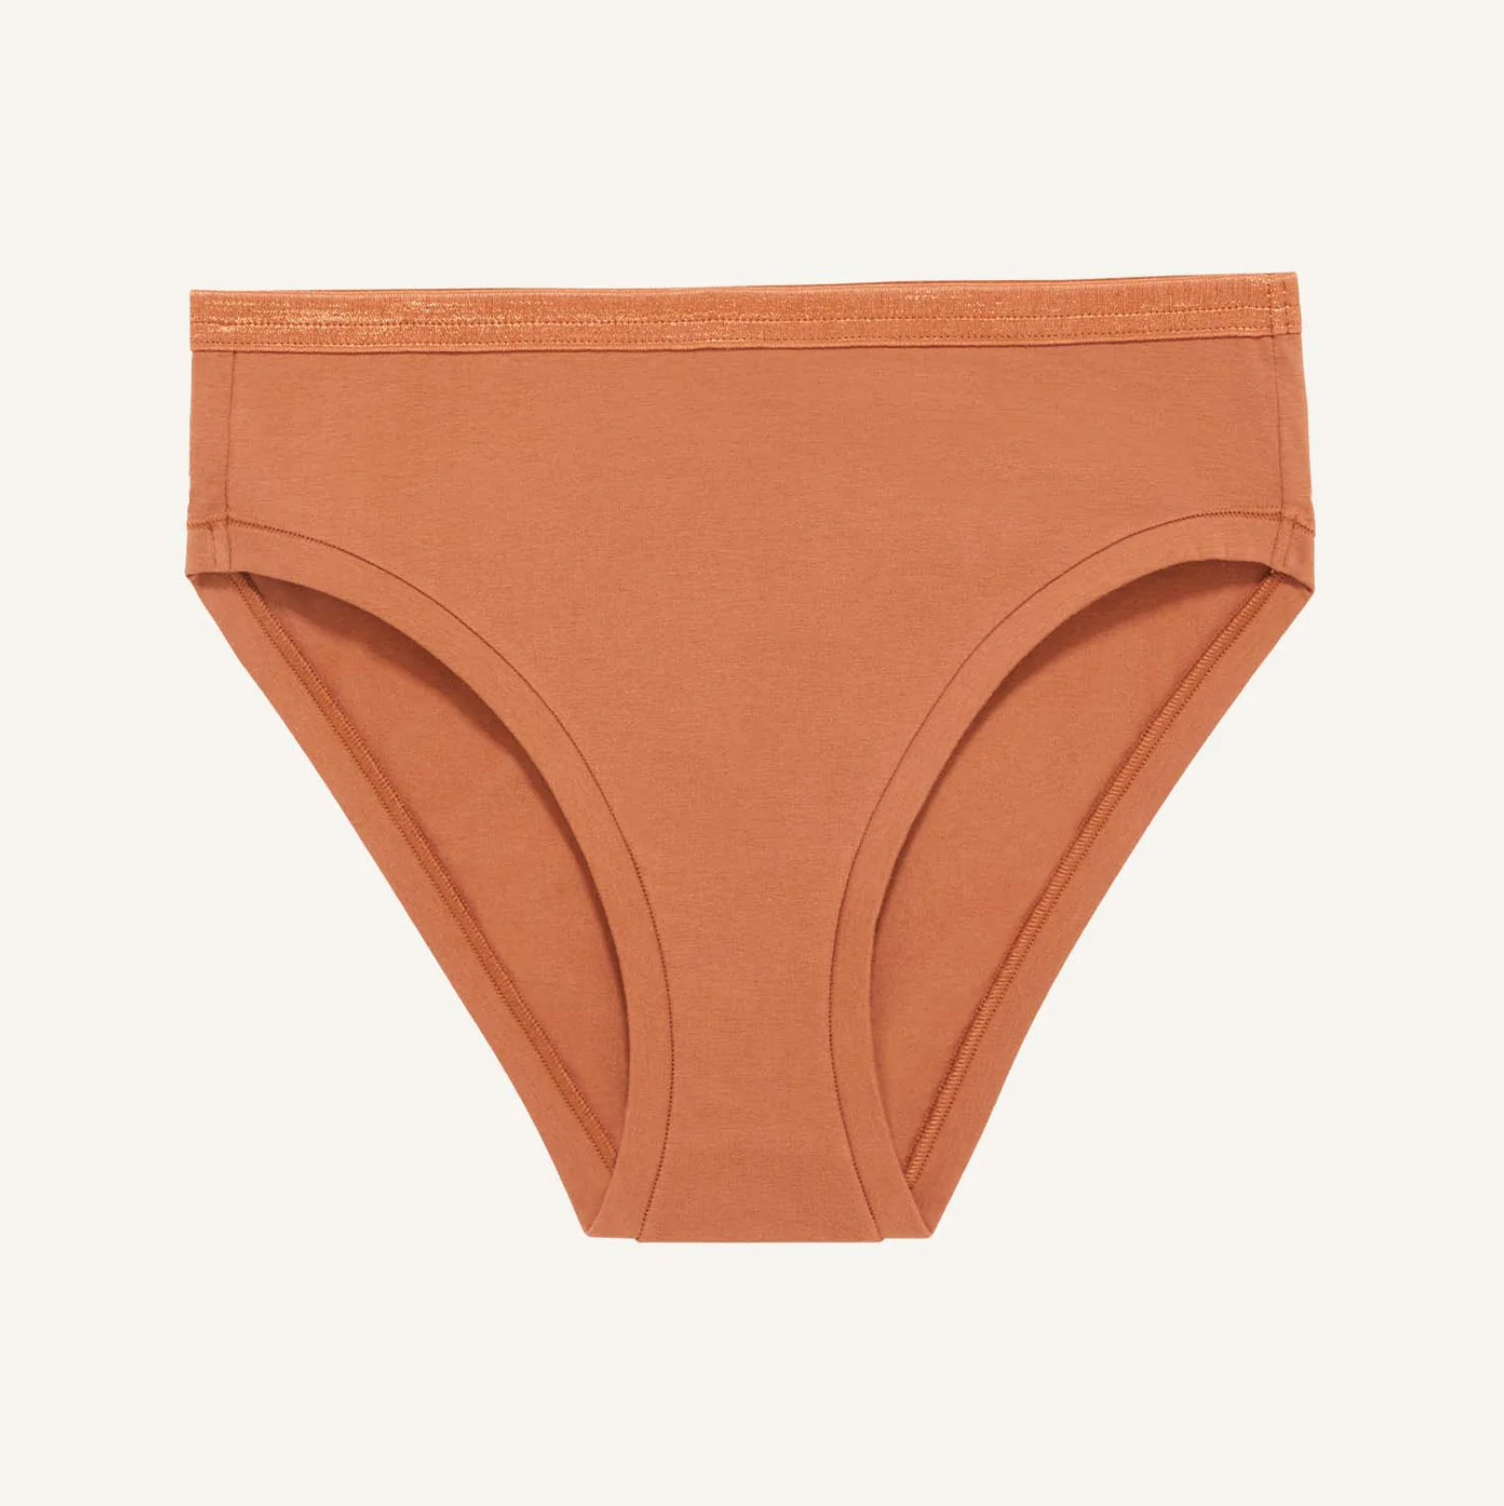 ⋆𝐛𝐚𝐦𝐛𝐢⋆ on X: what color underwear you looking to wear new year's  eve??  / X